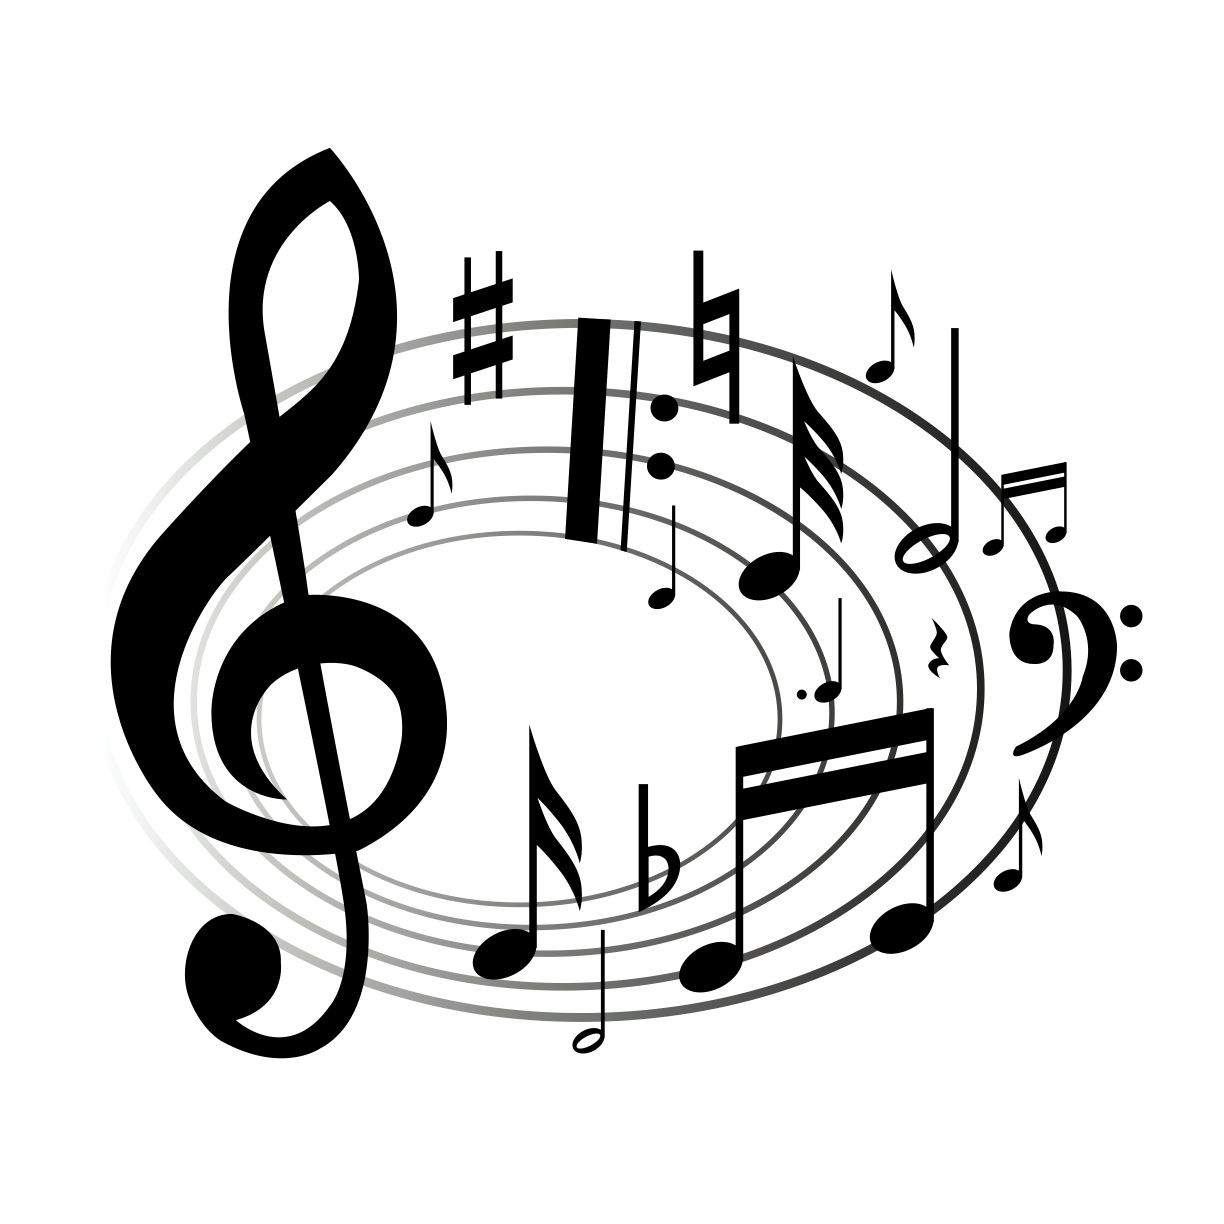 Music Note Border Clipart   Clipart Panda   Free Clipart Images